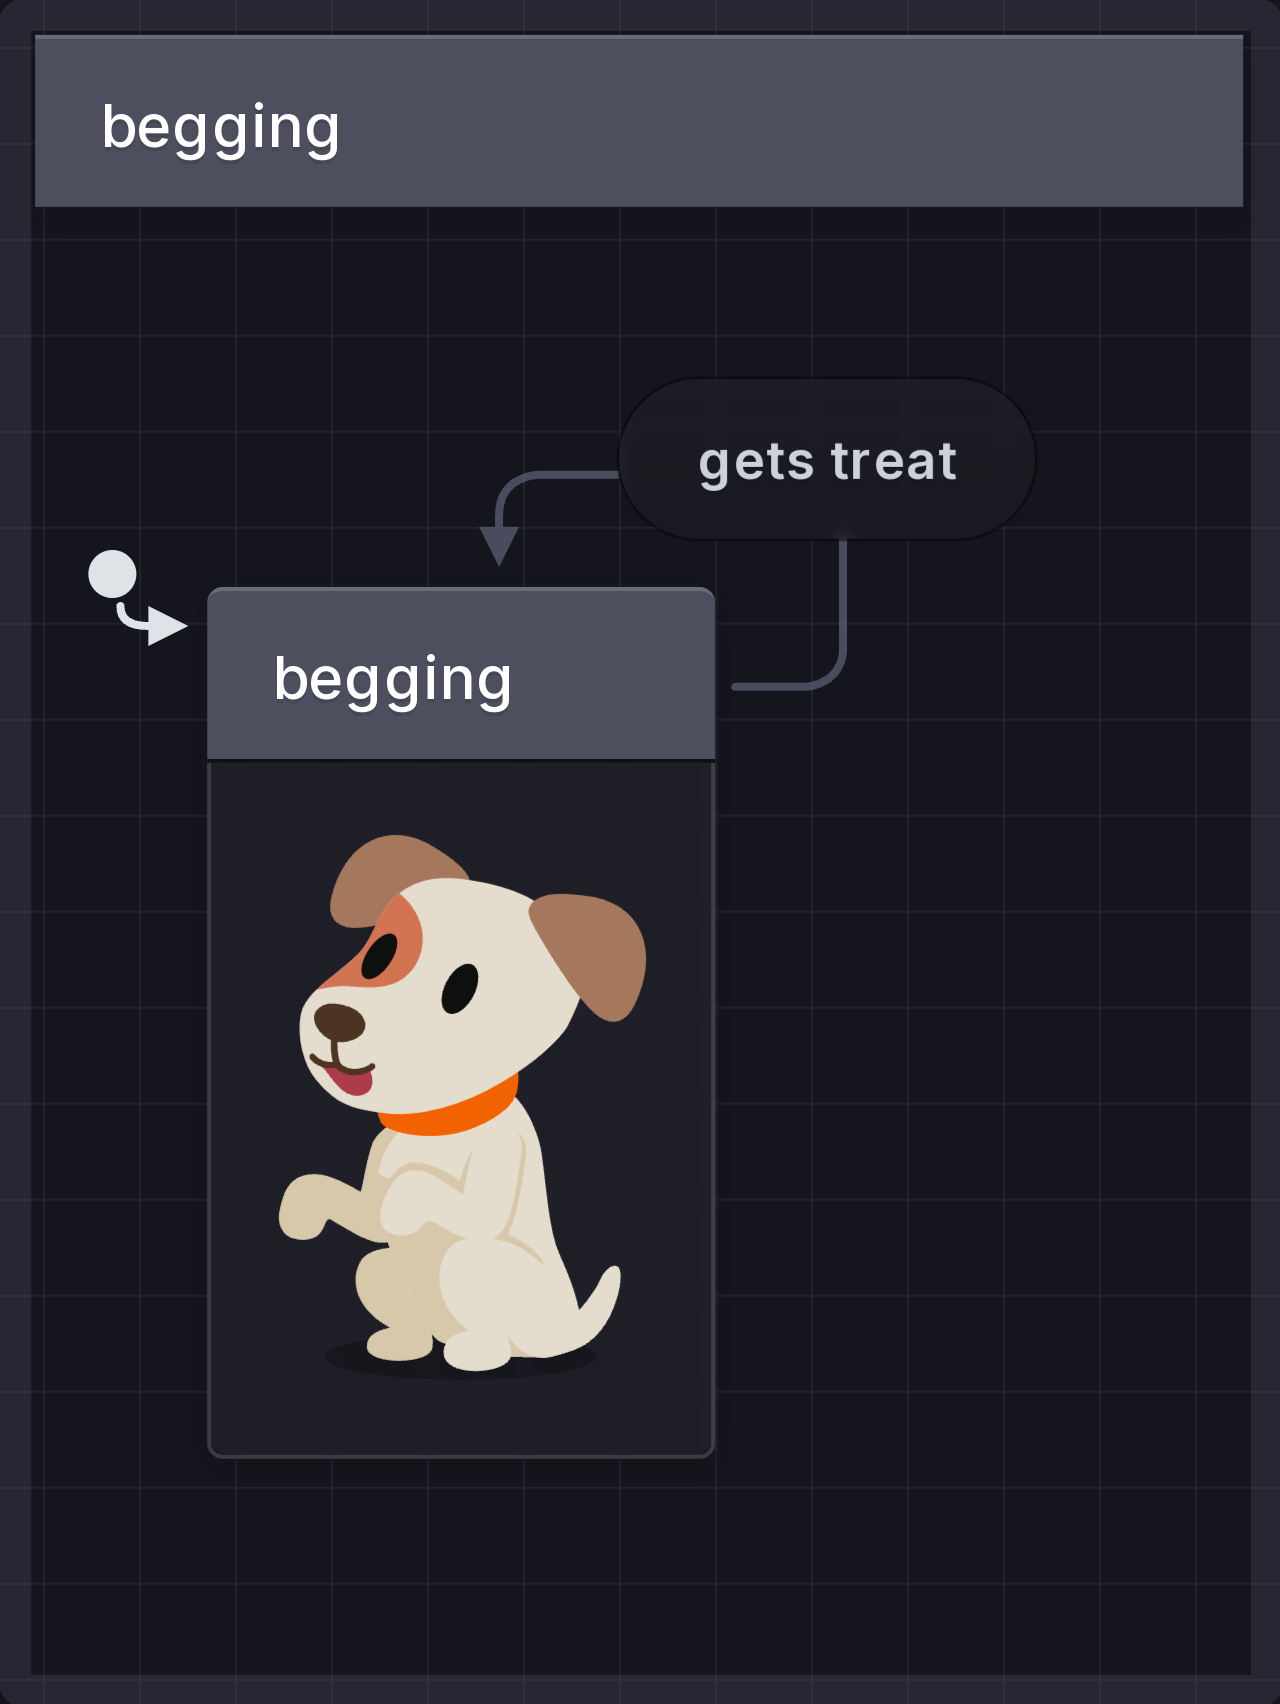 Dog begging machine with one begging state and a ‘gets treat’ transition which leaves and returns to the same state.